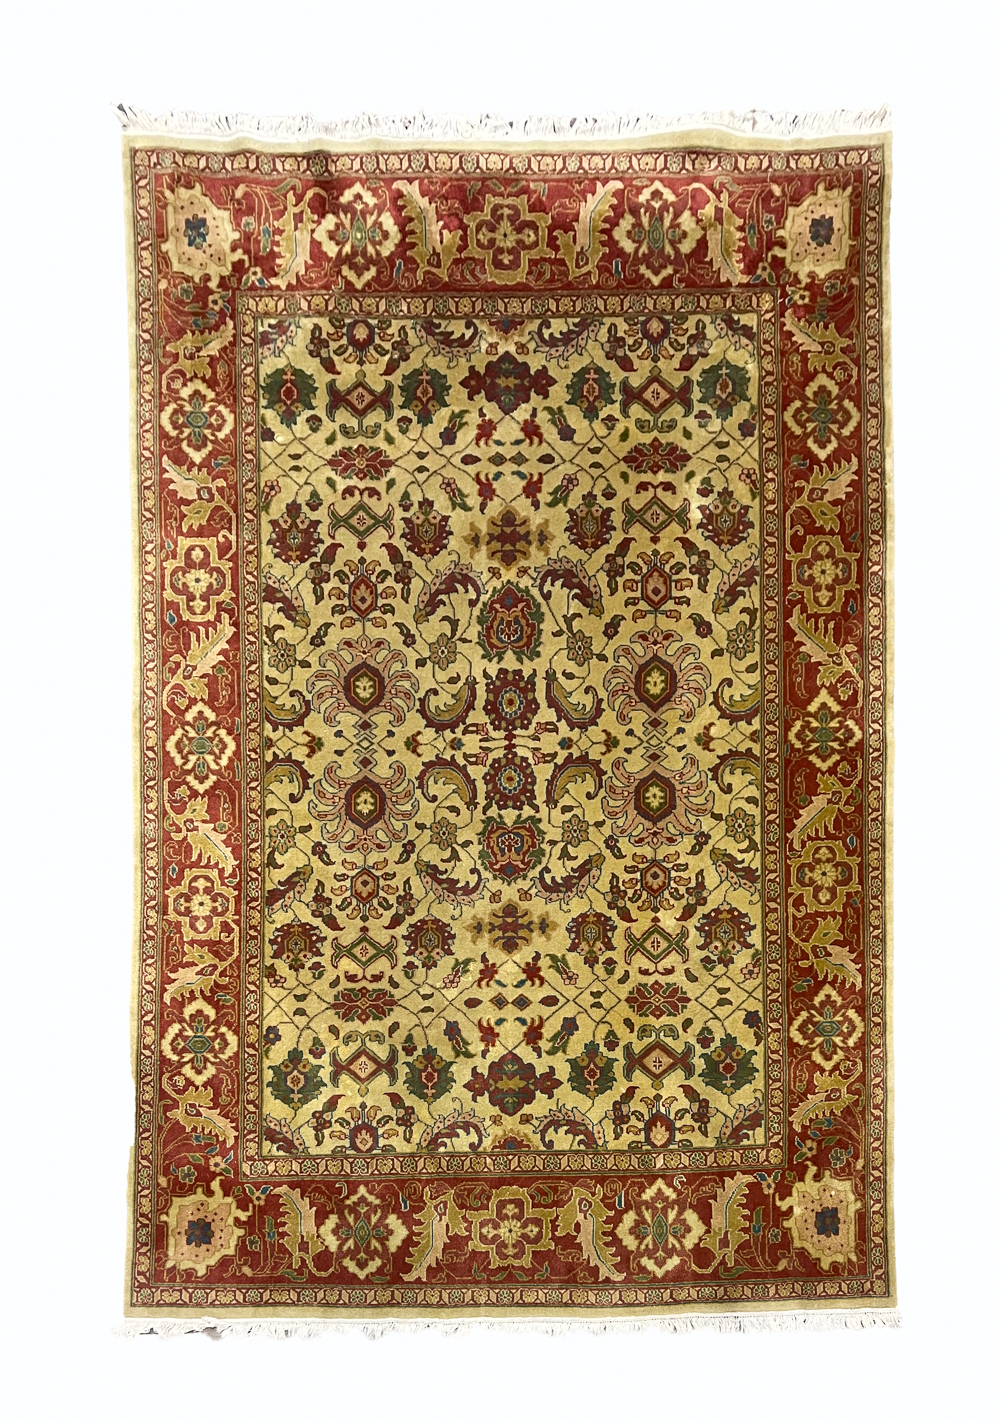 INDO-PERSIAN RUG. Labeled "Made